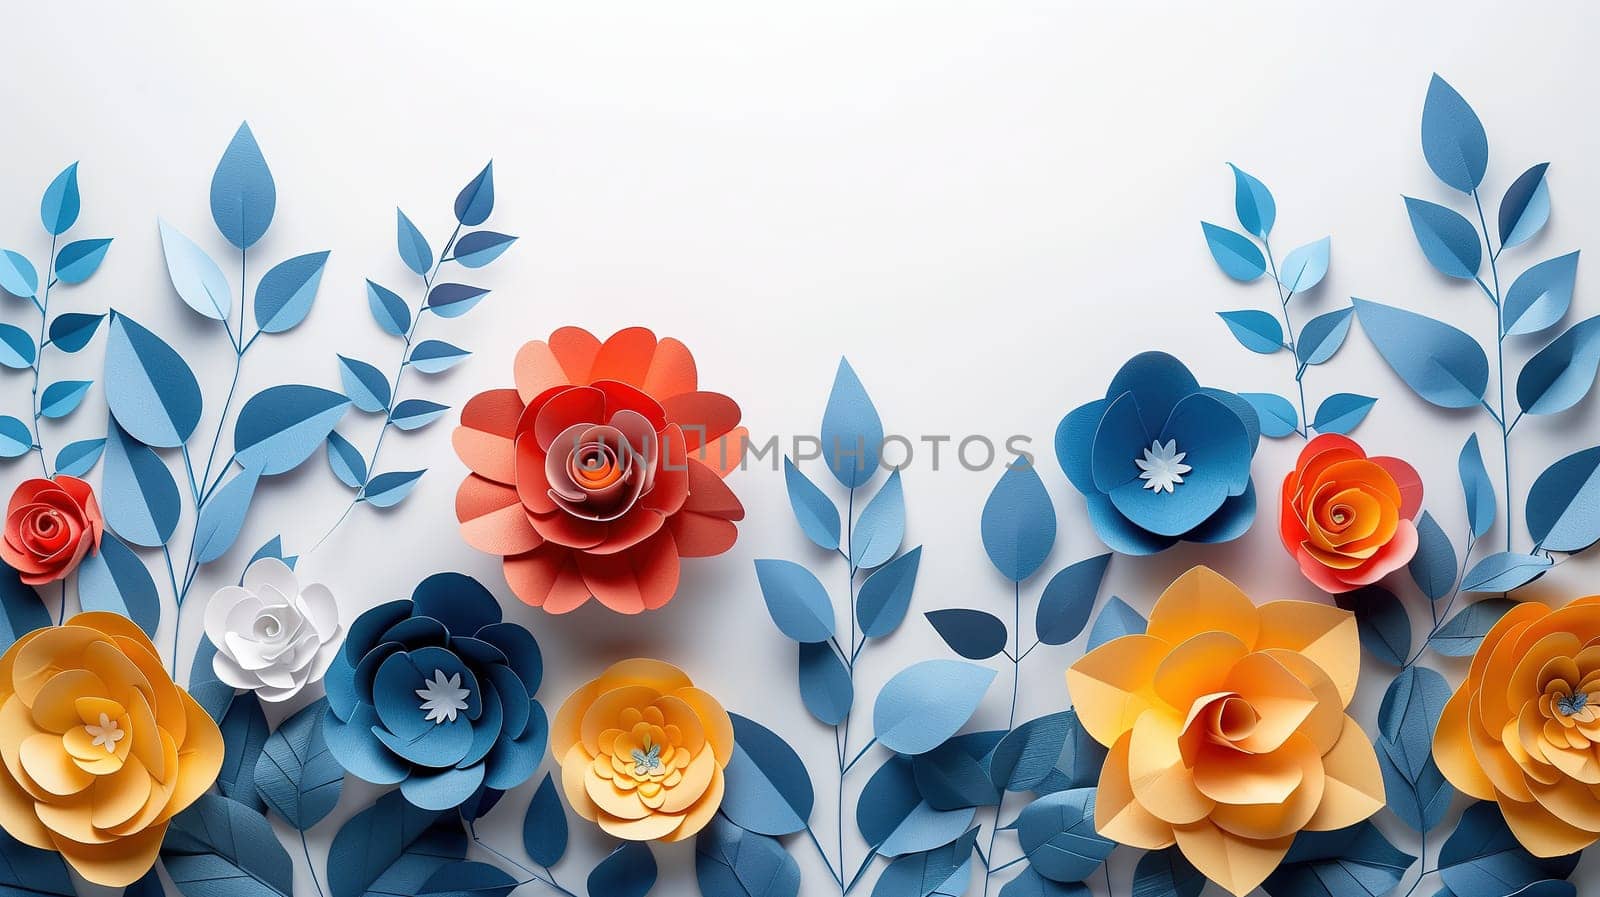 Paper Flowers Arranged on White Wall by TRMK